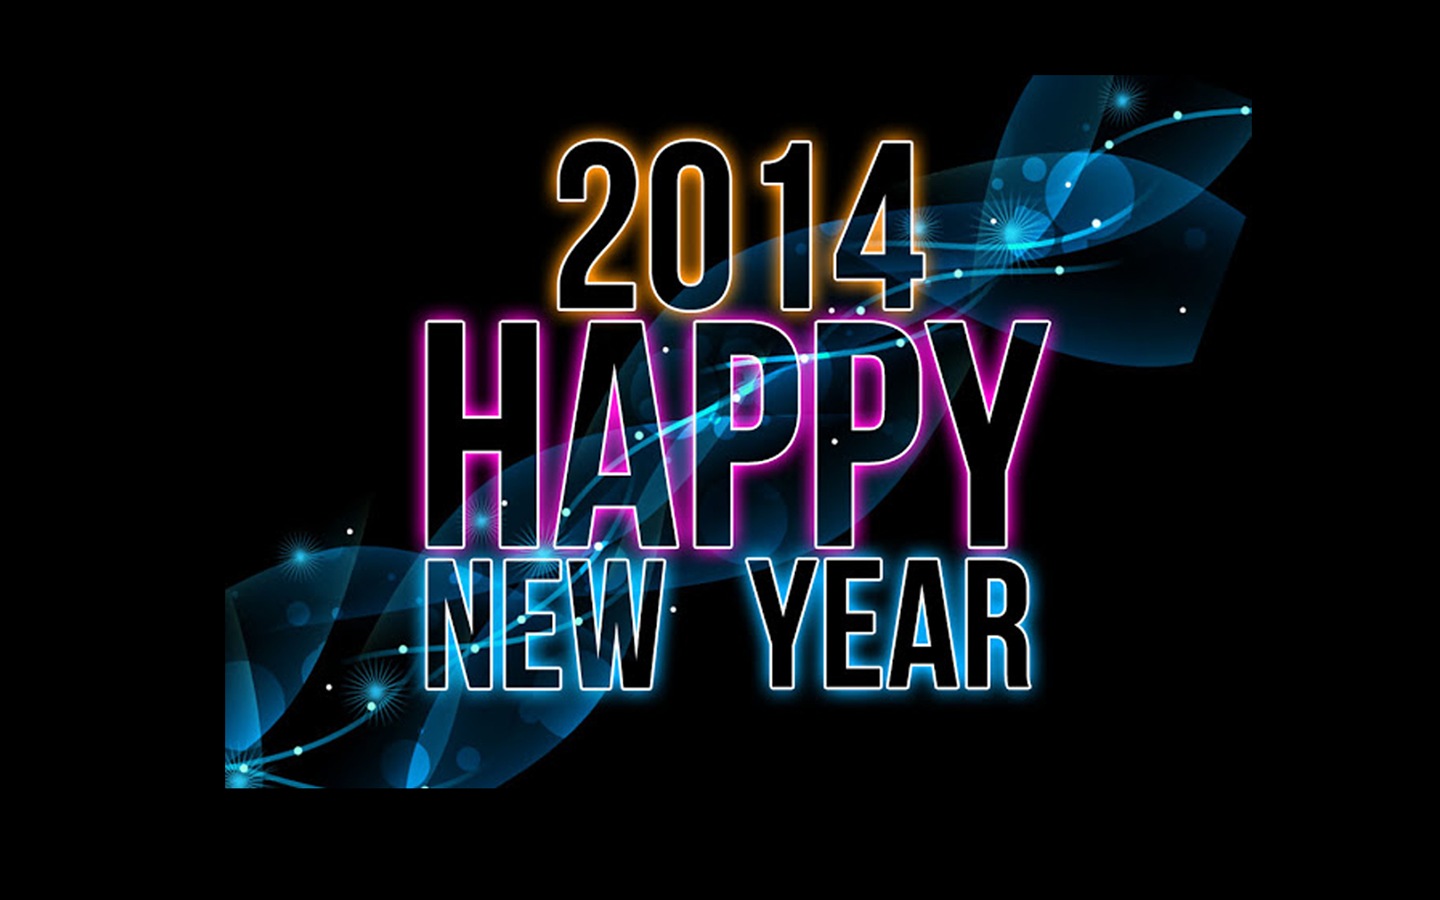 2014 New Year Theme HD Wallpapers (1) #11 - 1440x900